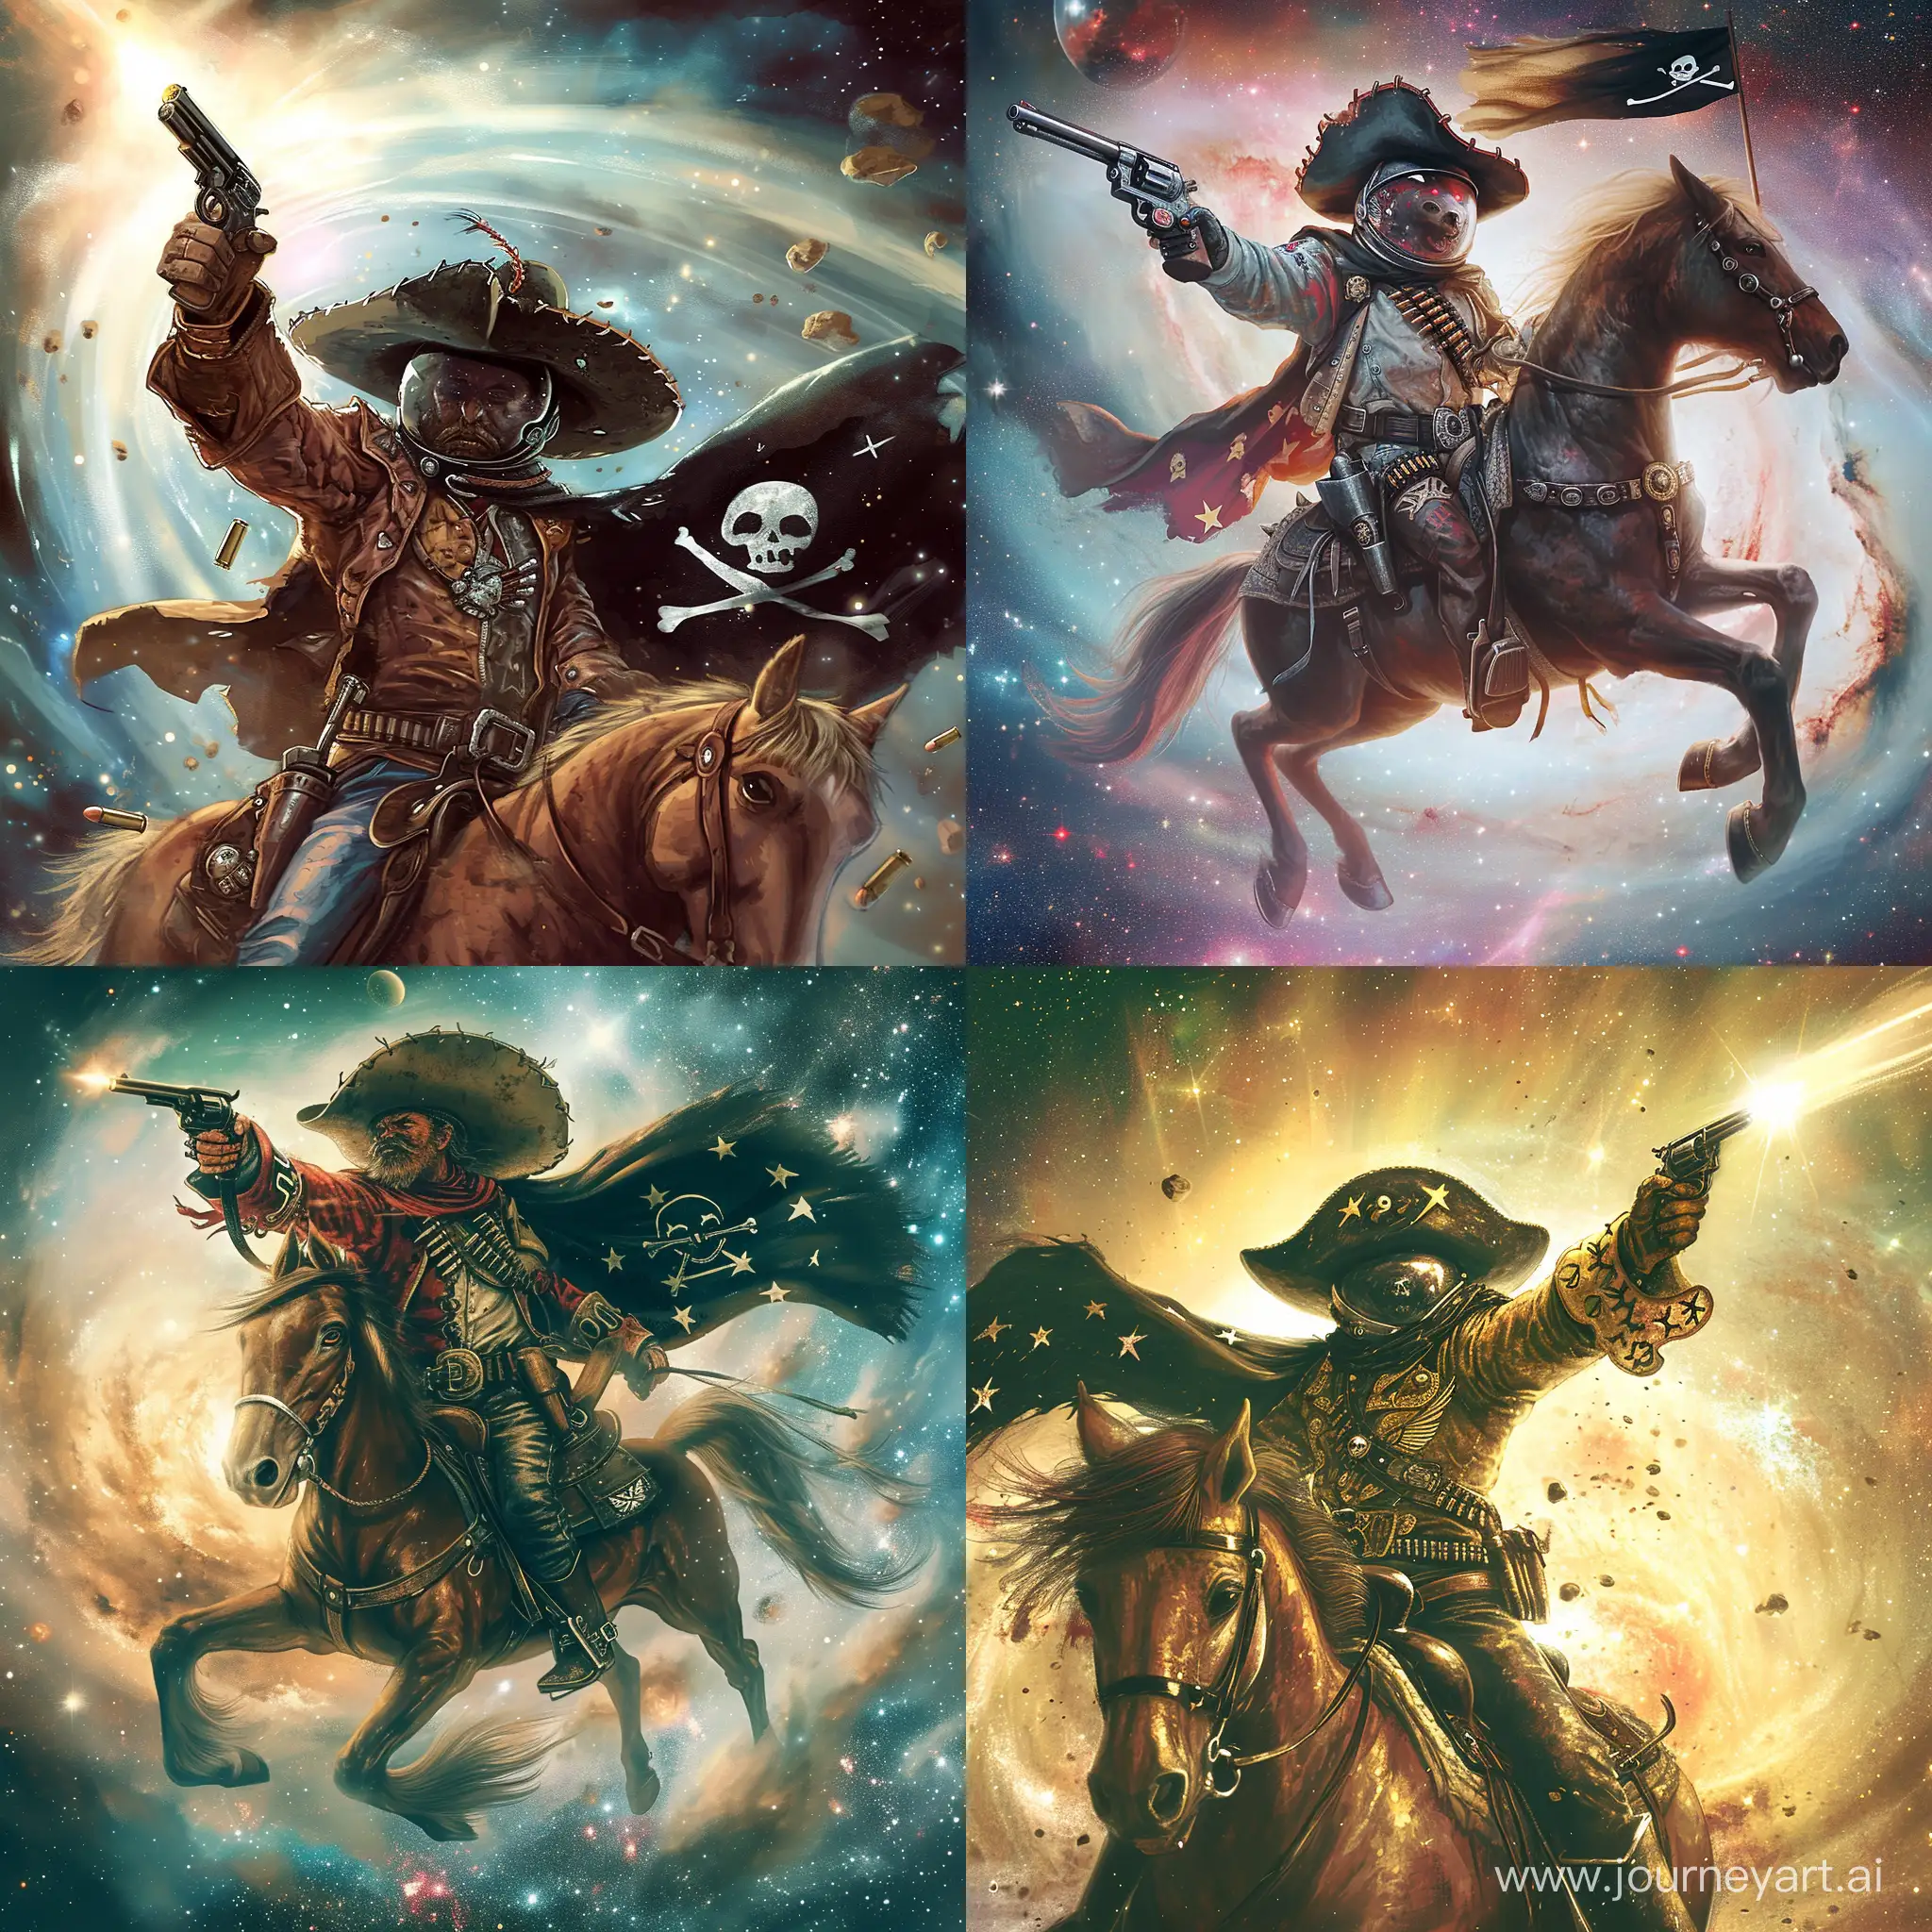 space cowboy pirate with a cowboy hat, space helmet and a pirate black flag in space with light galaxy background pointing a gun and riding a horse